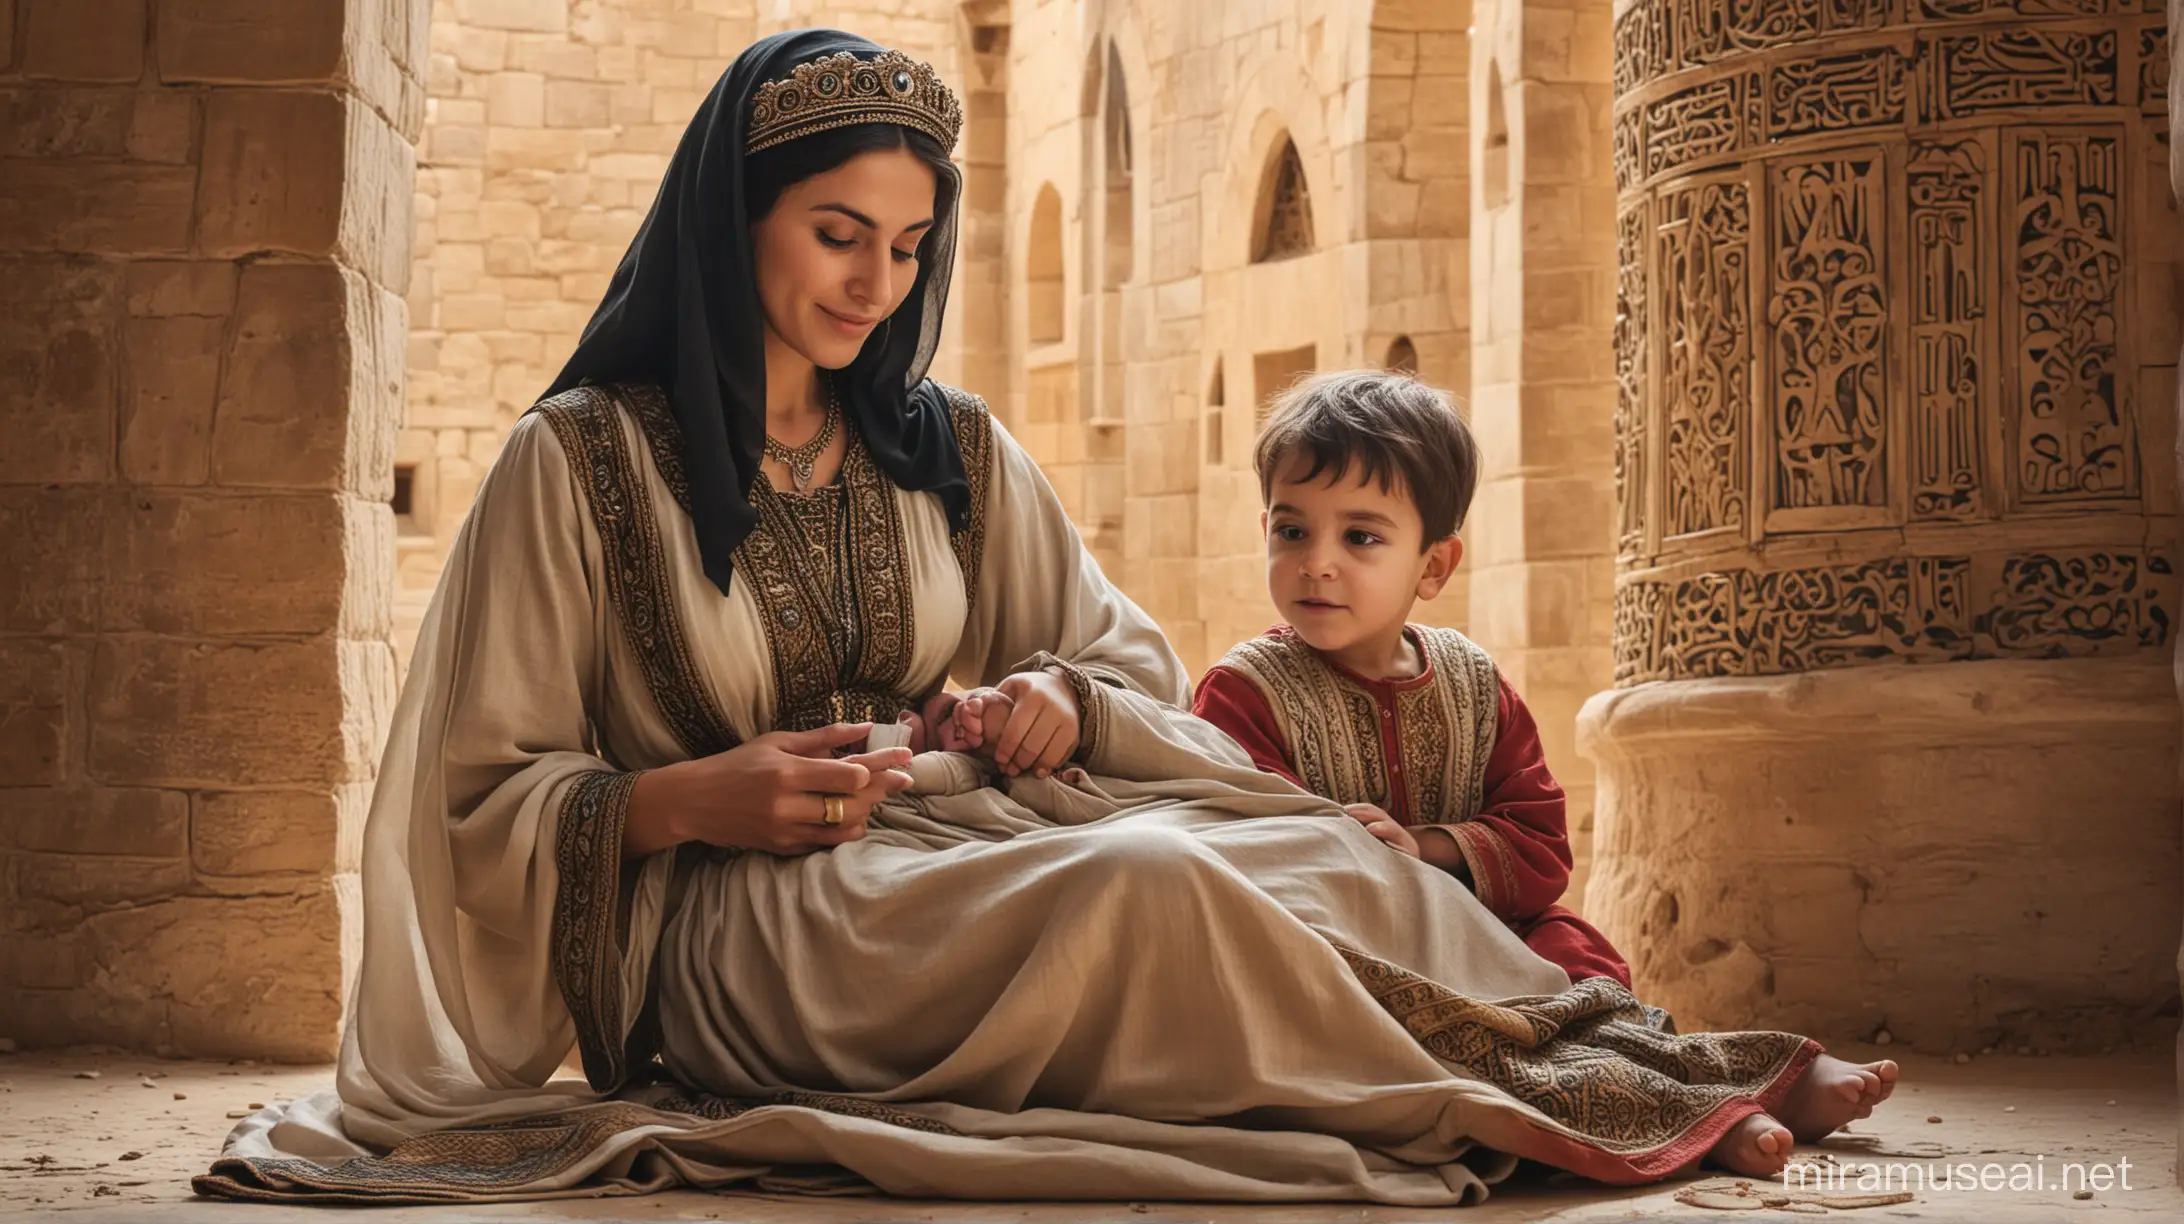 One woman with a male child in lap in mediaeval arab